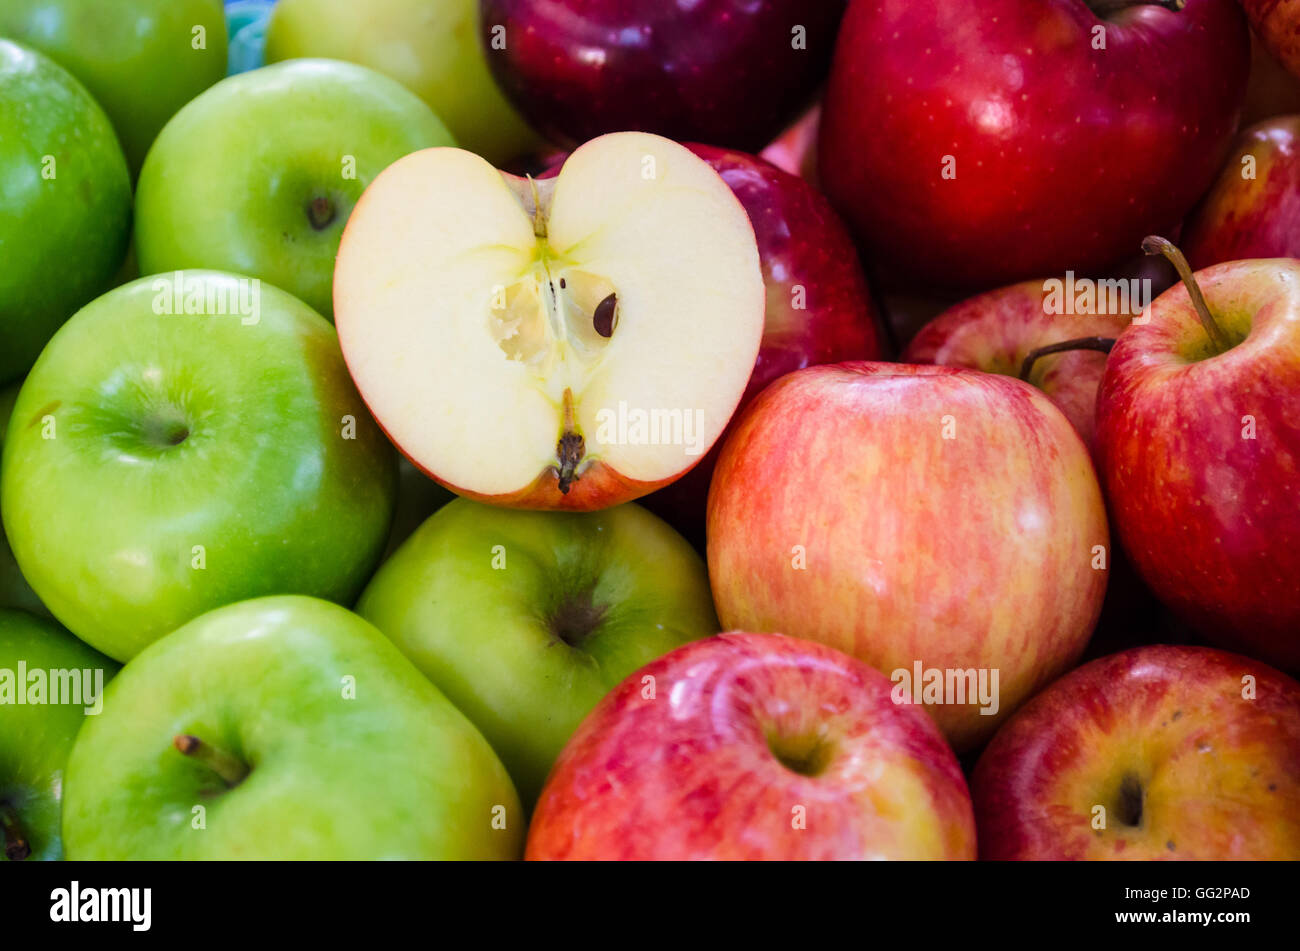 half apple on group of green and red apples Stock Photo